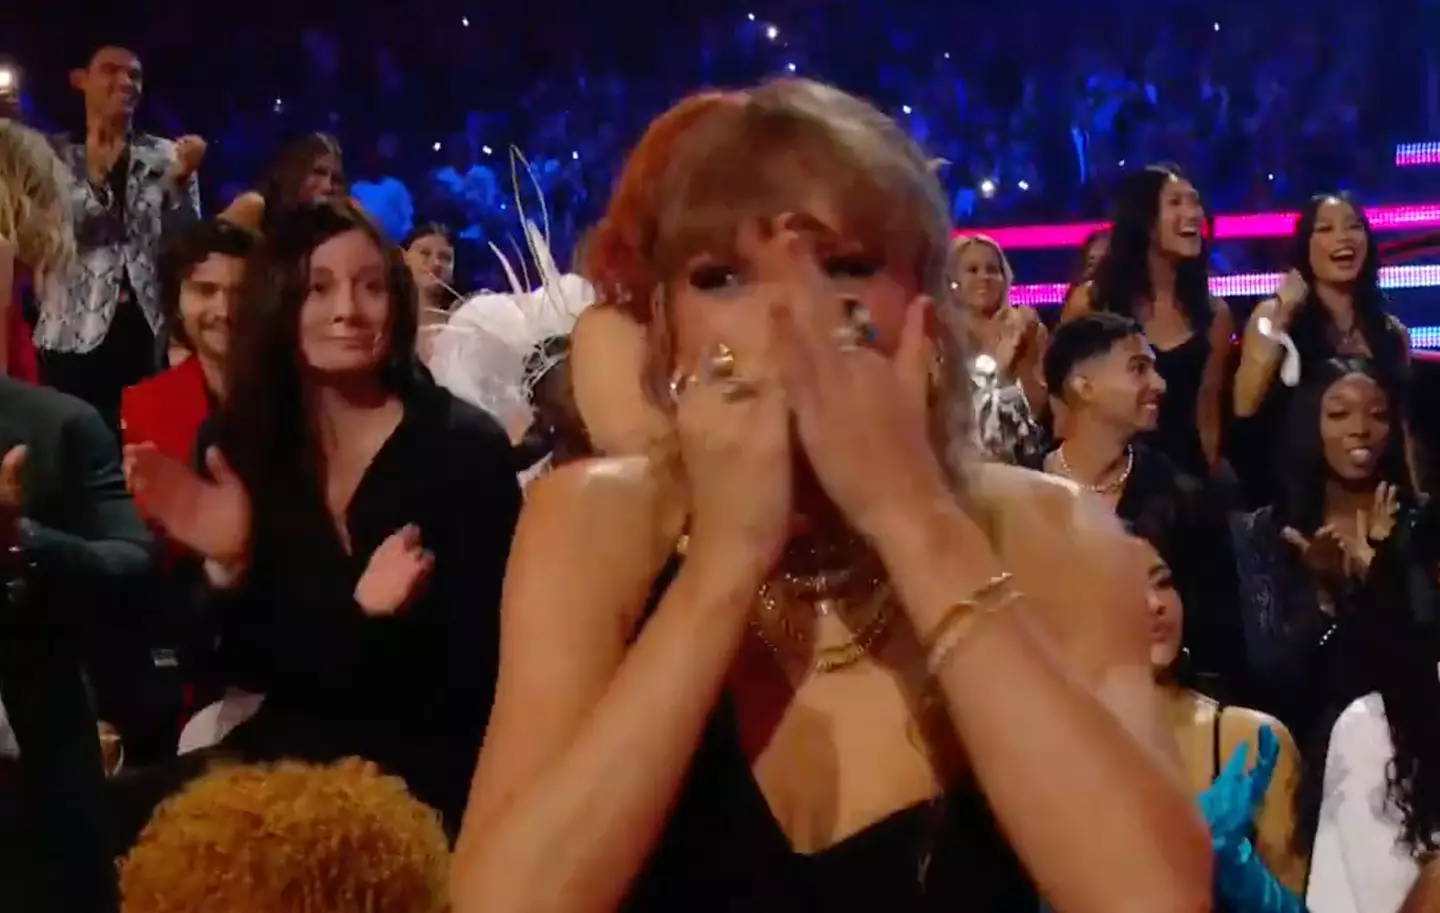 Taylor couldn't cope.